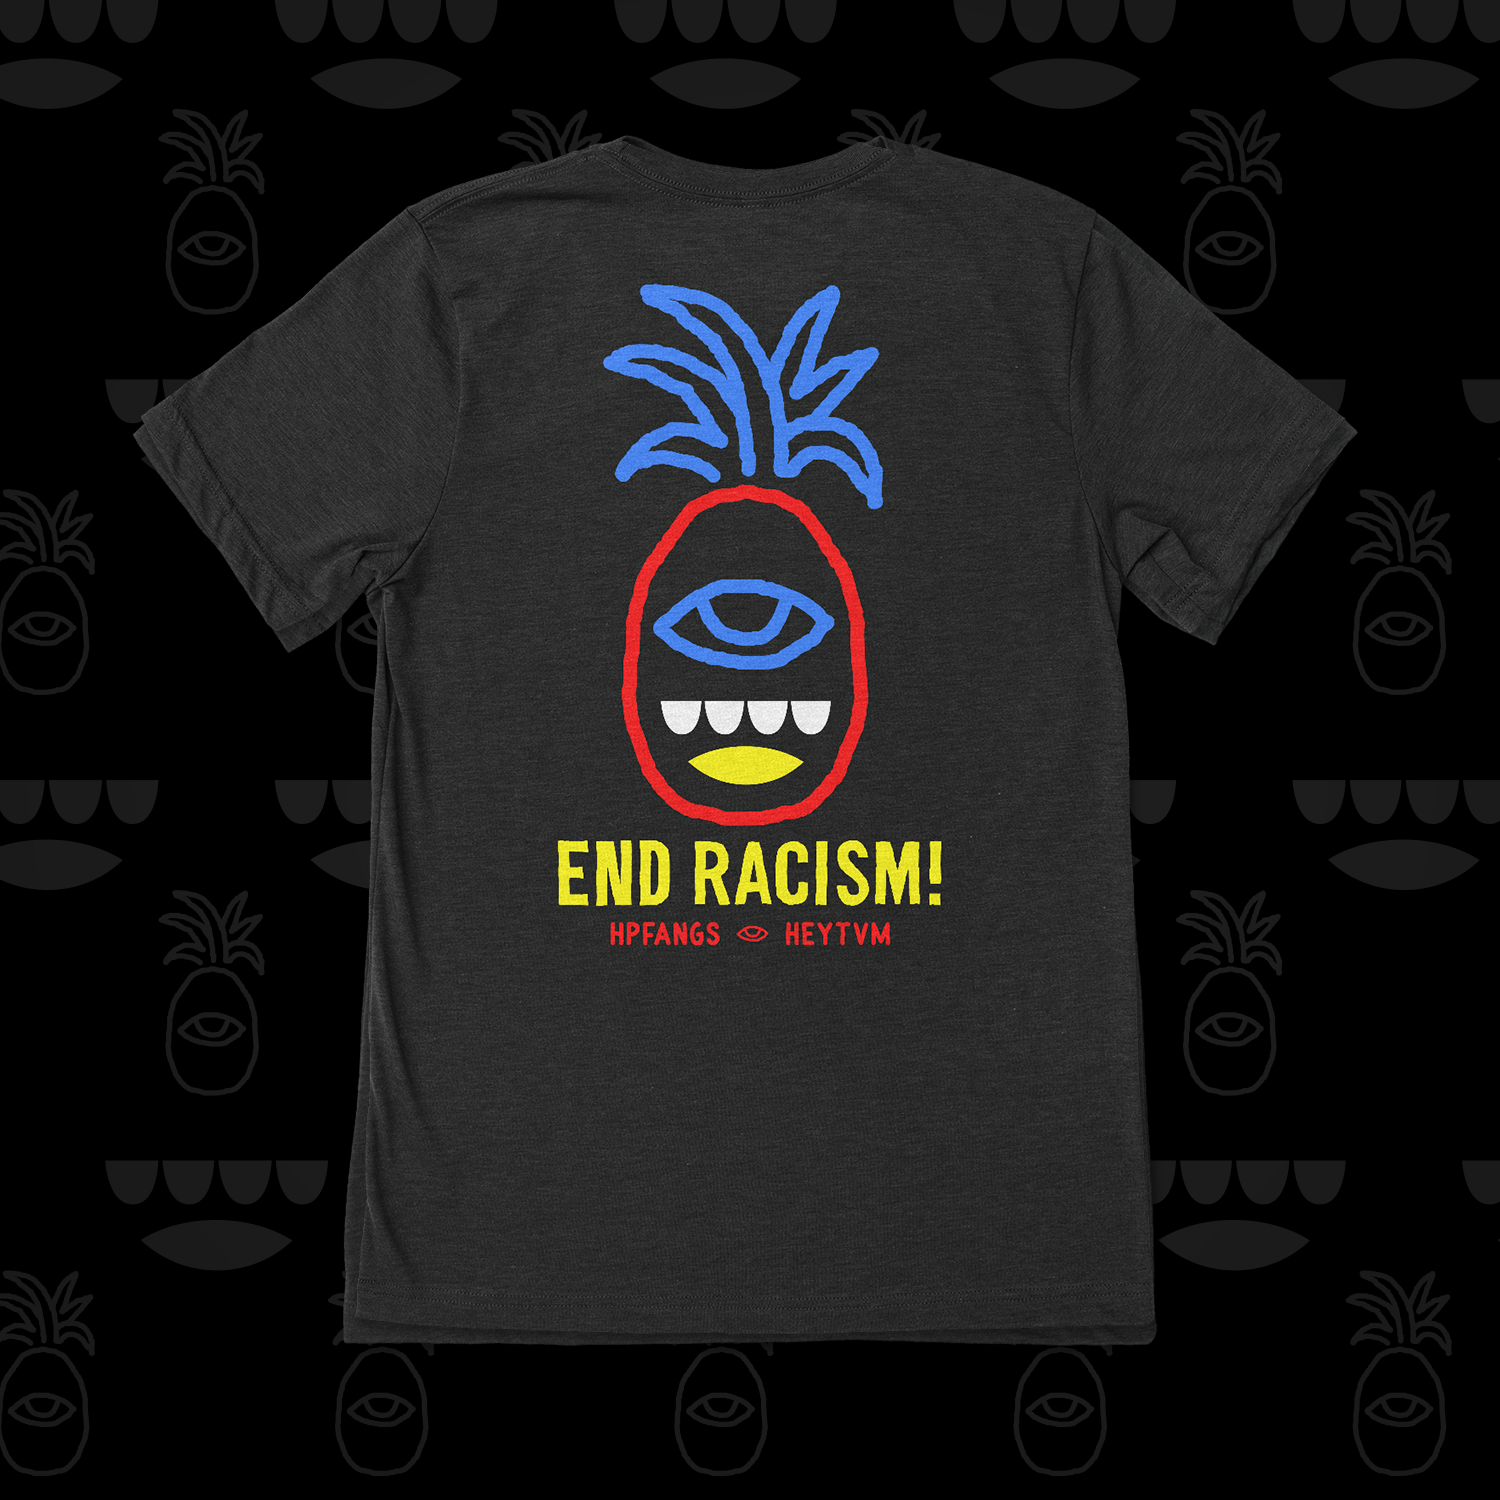 Hey Tvm / Hp Fangs End Racism Tee - Large